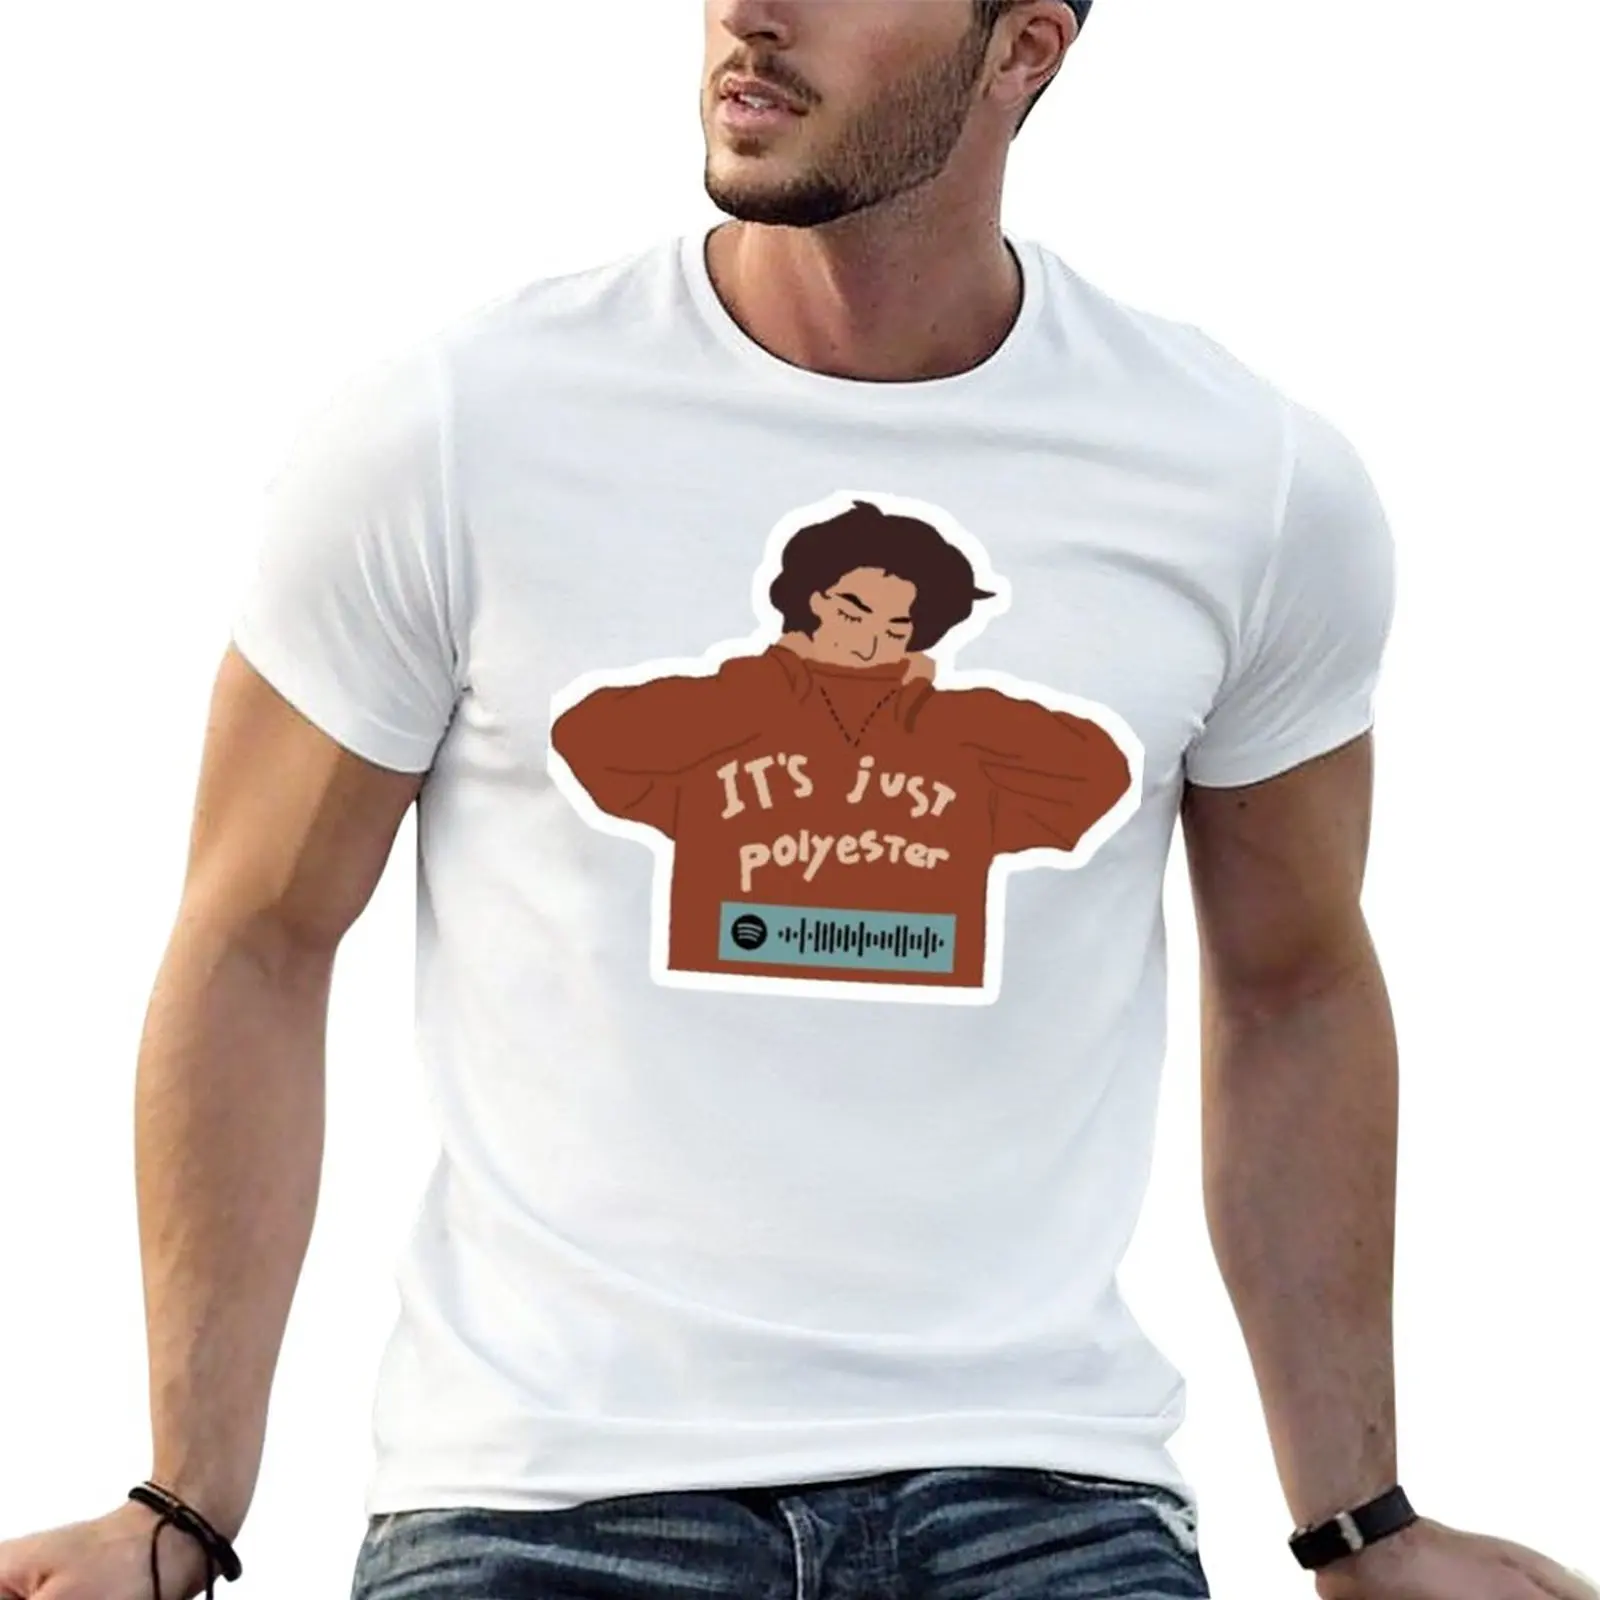 

It's just polyester T-Shirt aesthetic clothes tops sweat shirt t shirts for men